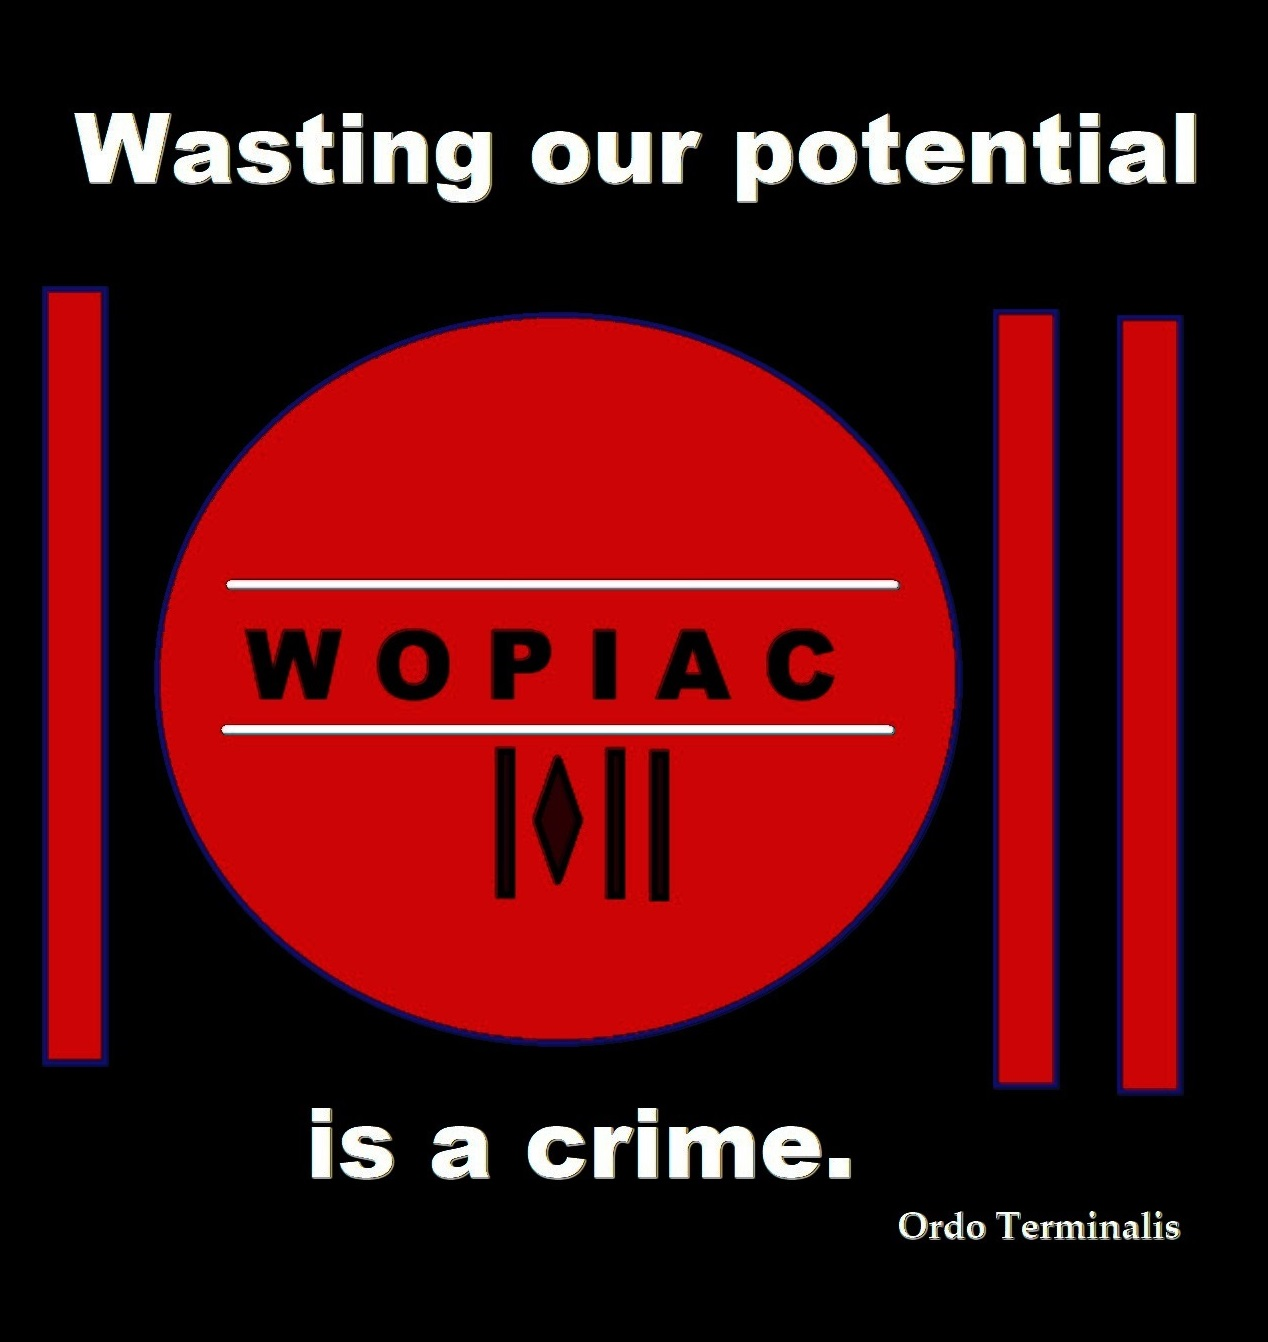 Wasting our potential is a crime.